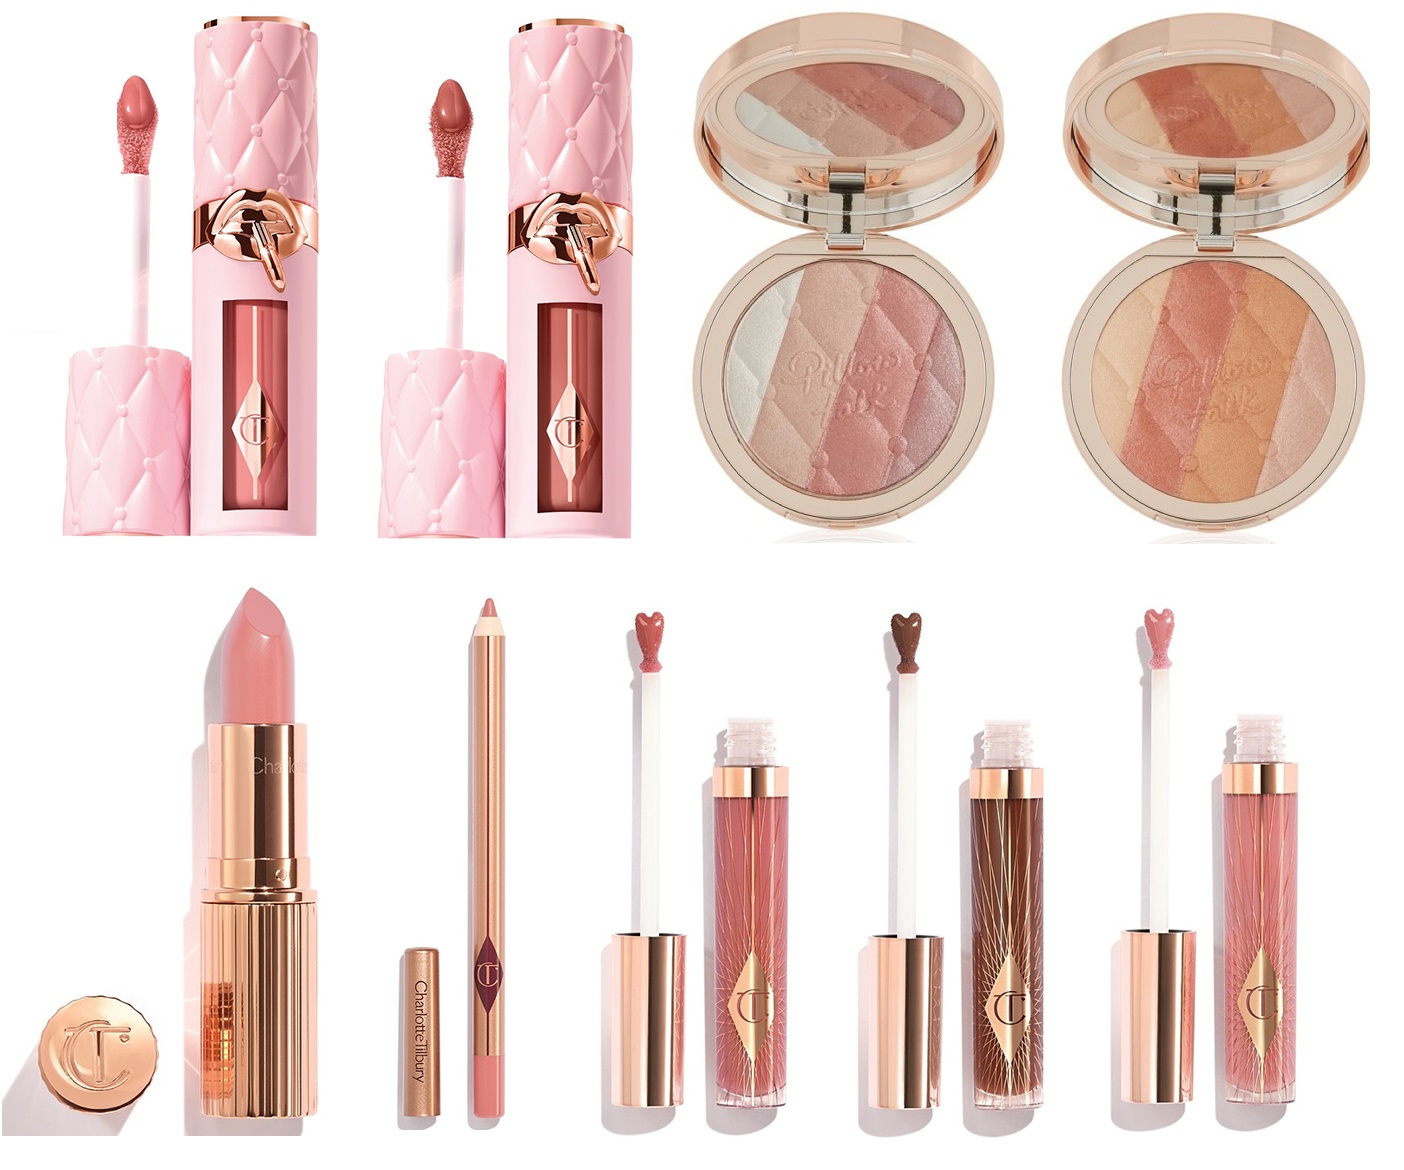 New additions to the Charlotte Tilbury Pillow Talk Сollection